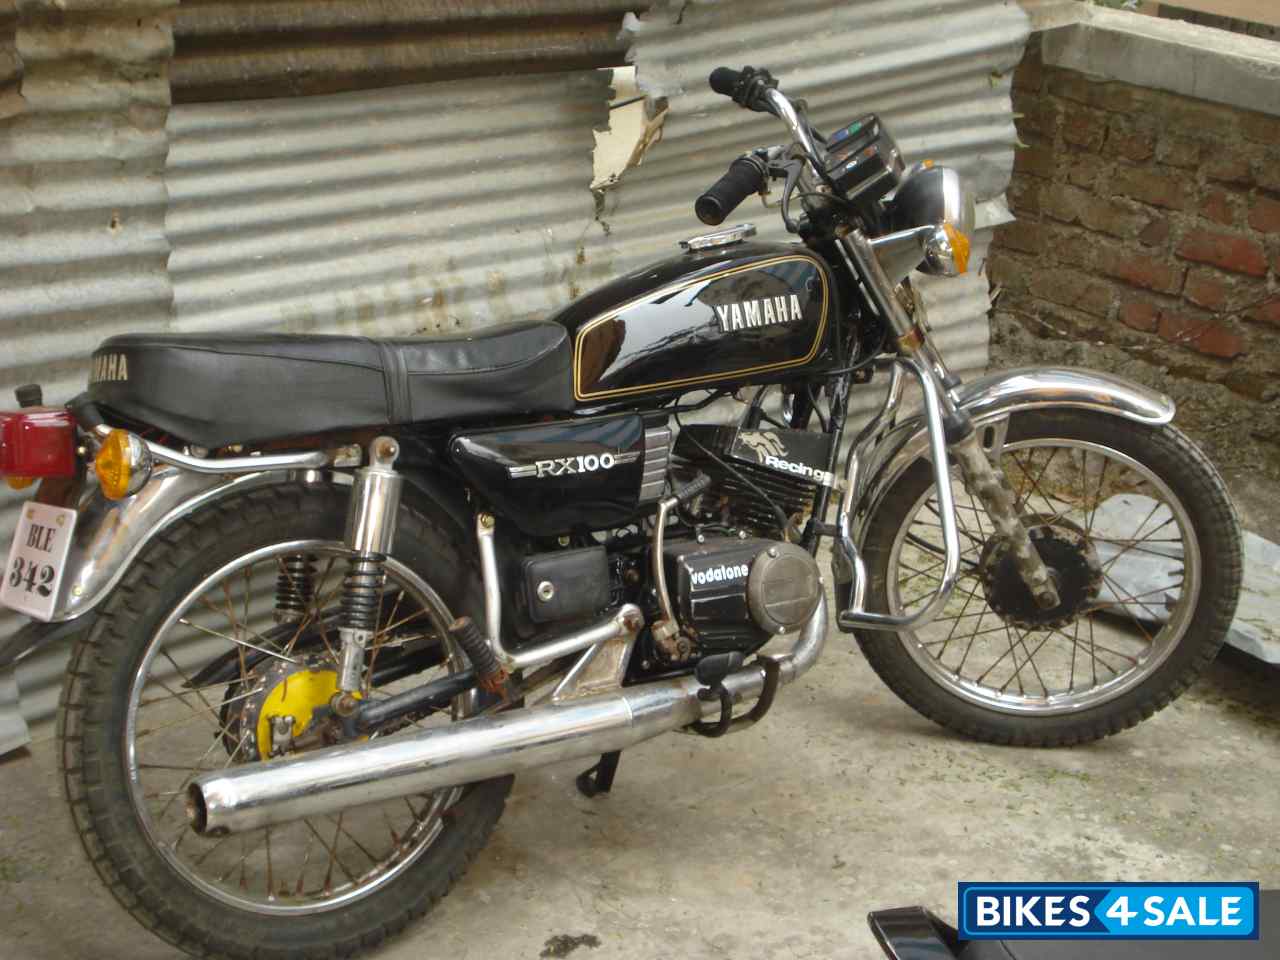 Used 1991 Model Yamaha Rx 100 For Sale In Pune Id Black Colour Bikes4sale